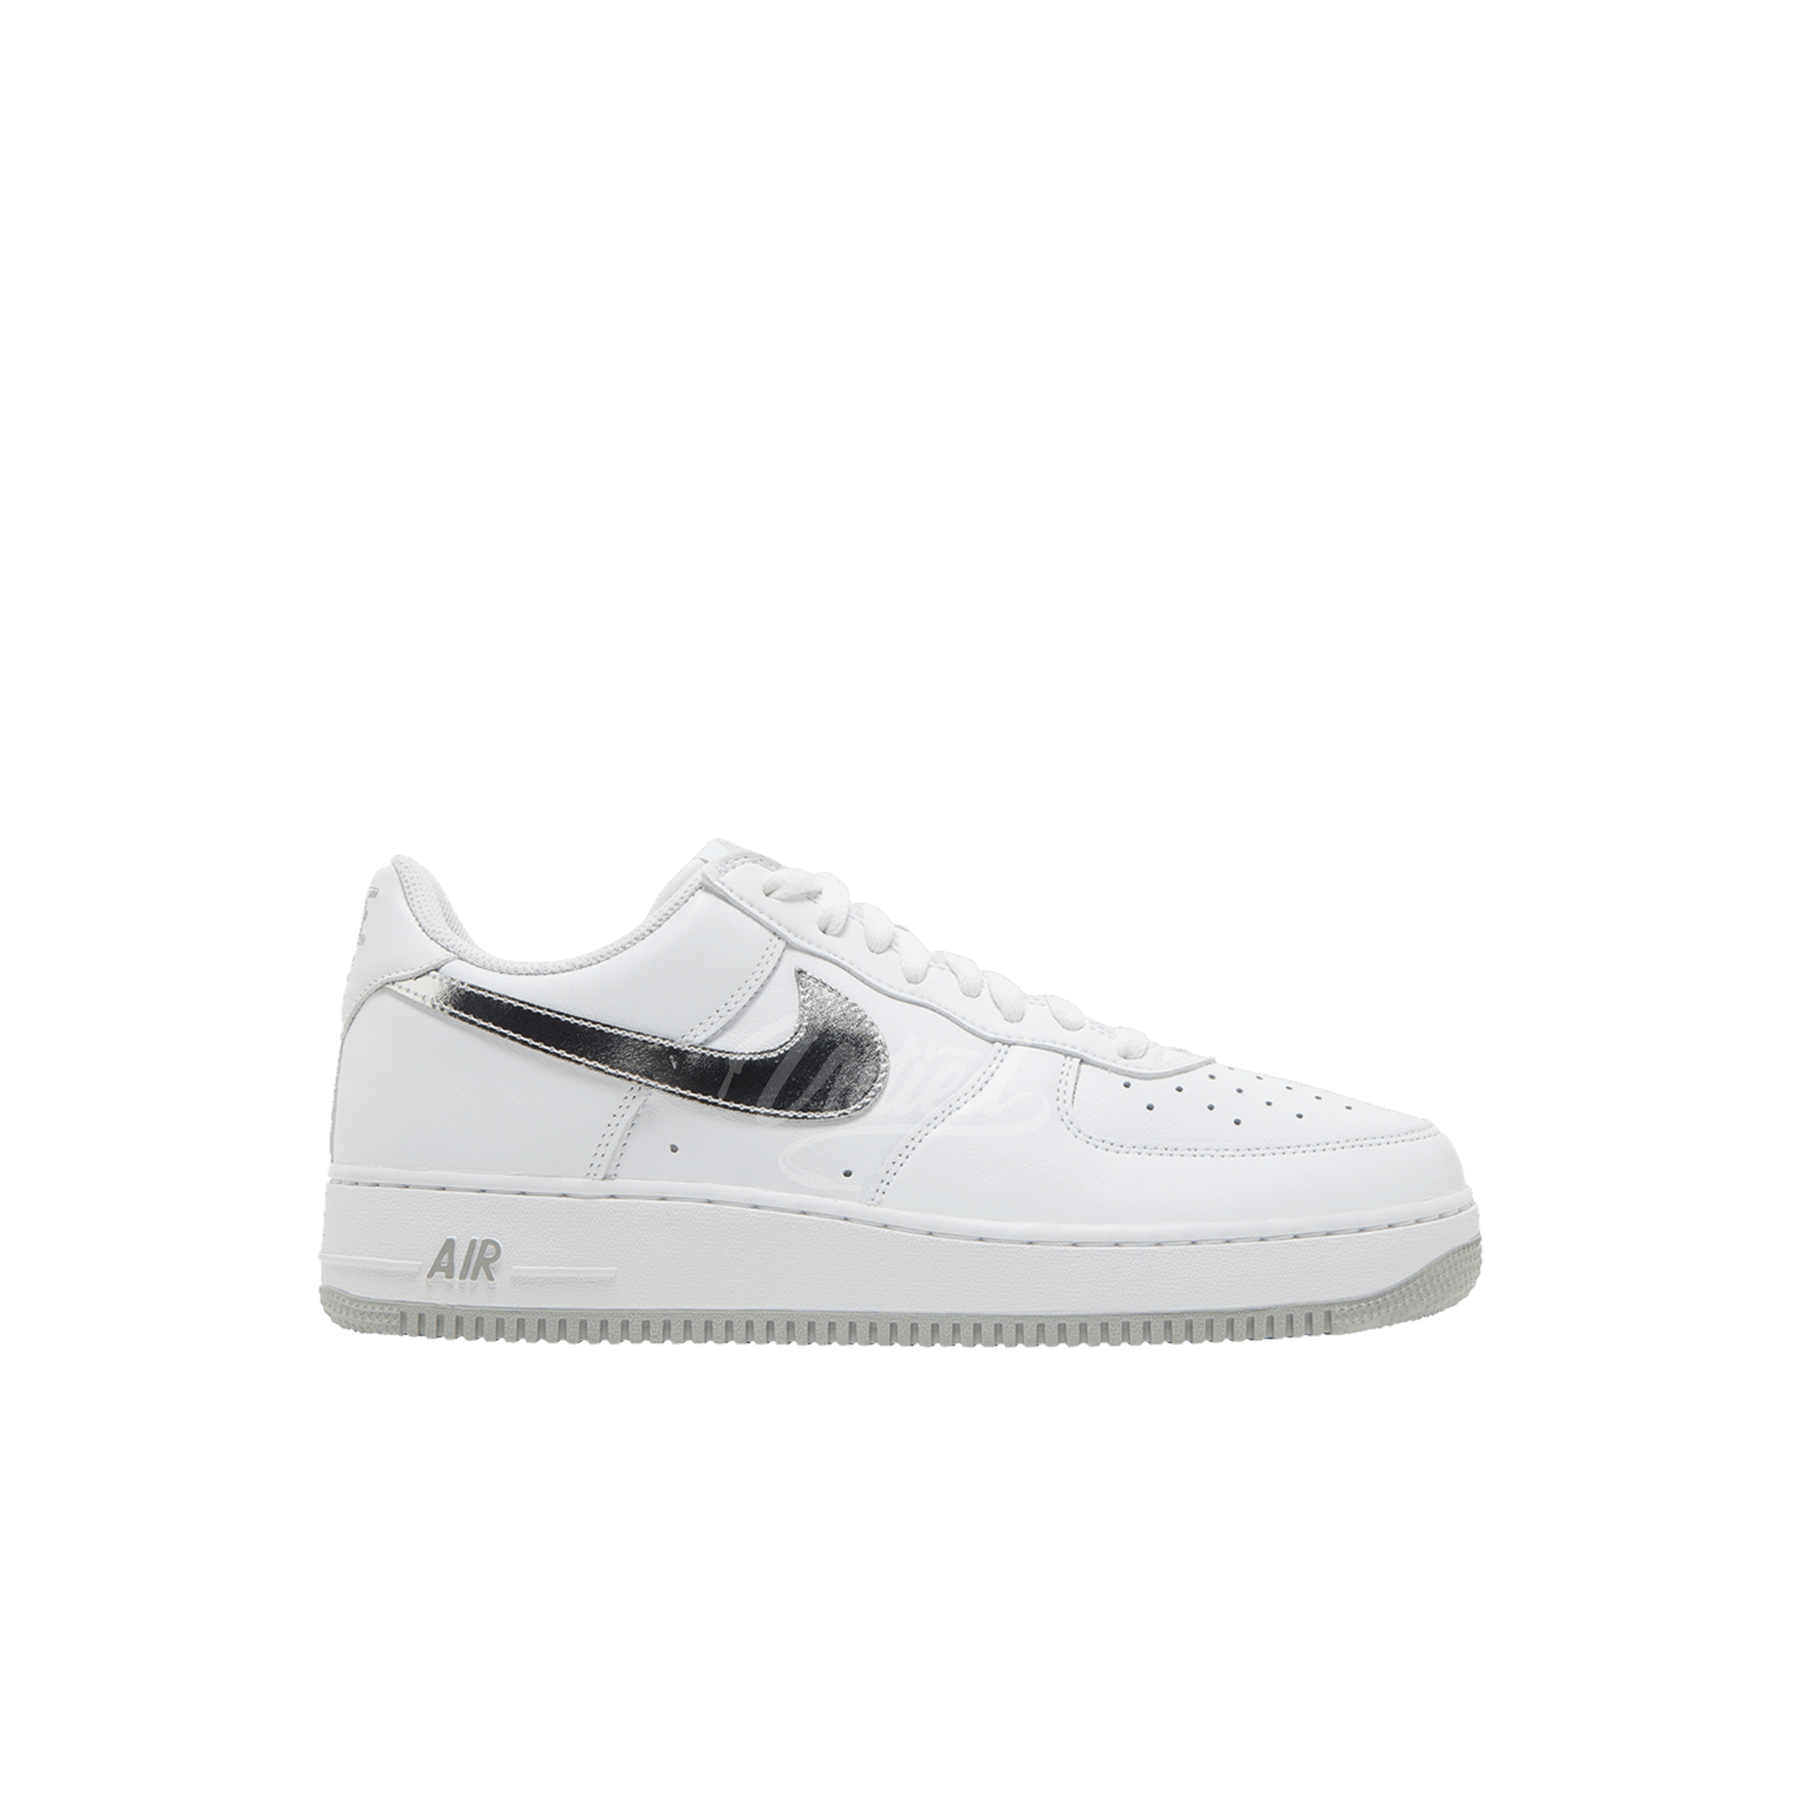 Air Force 1 Color of the Month "White/Metallic Silver"